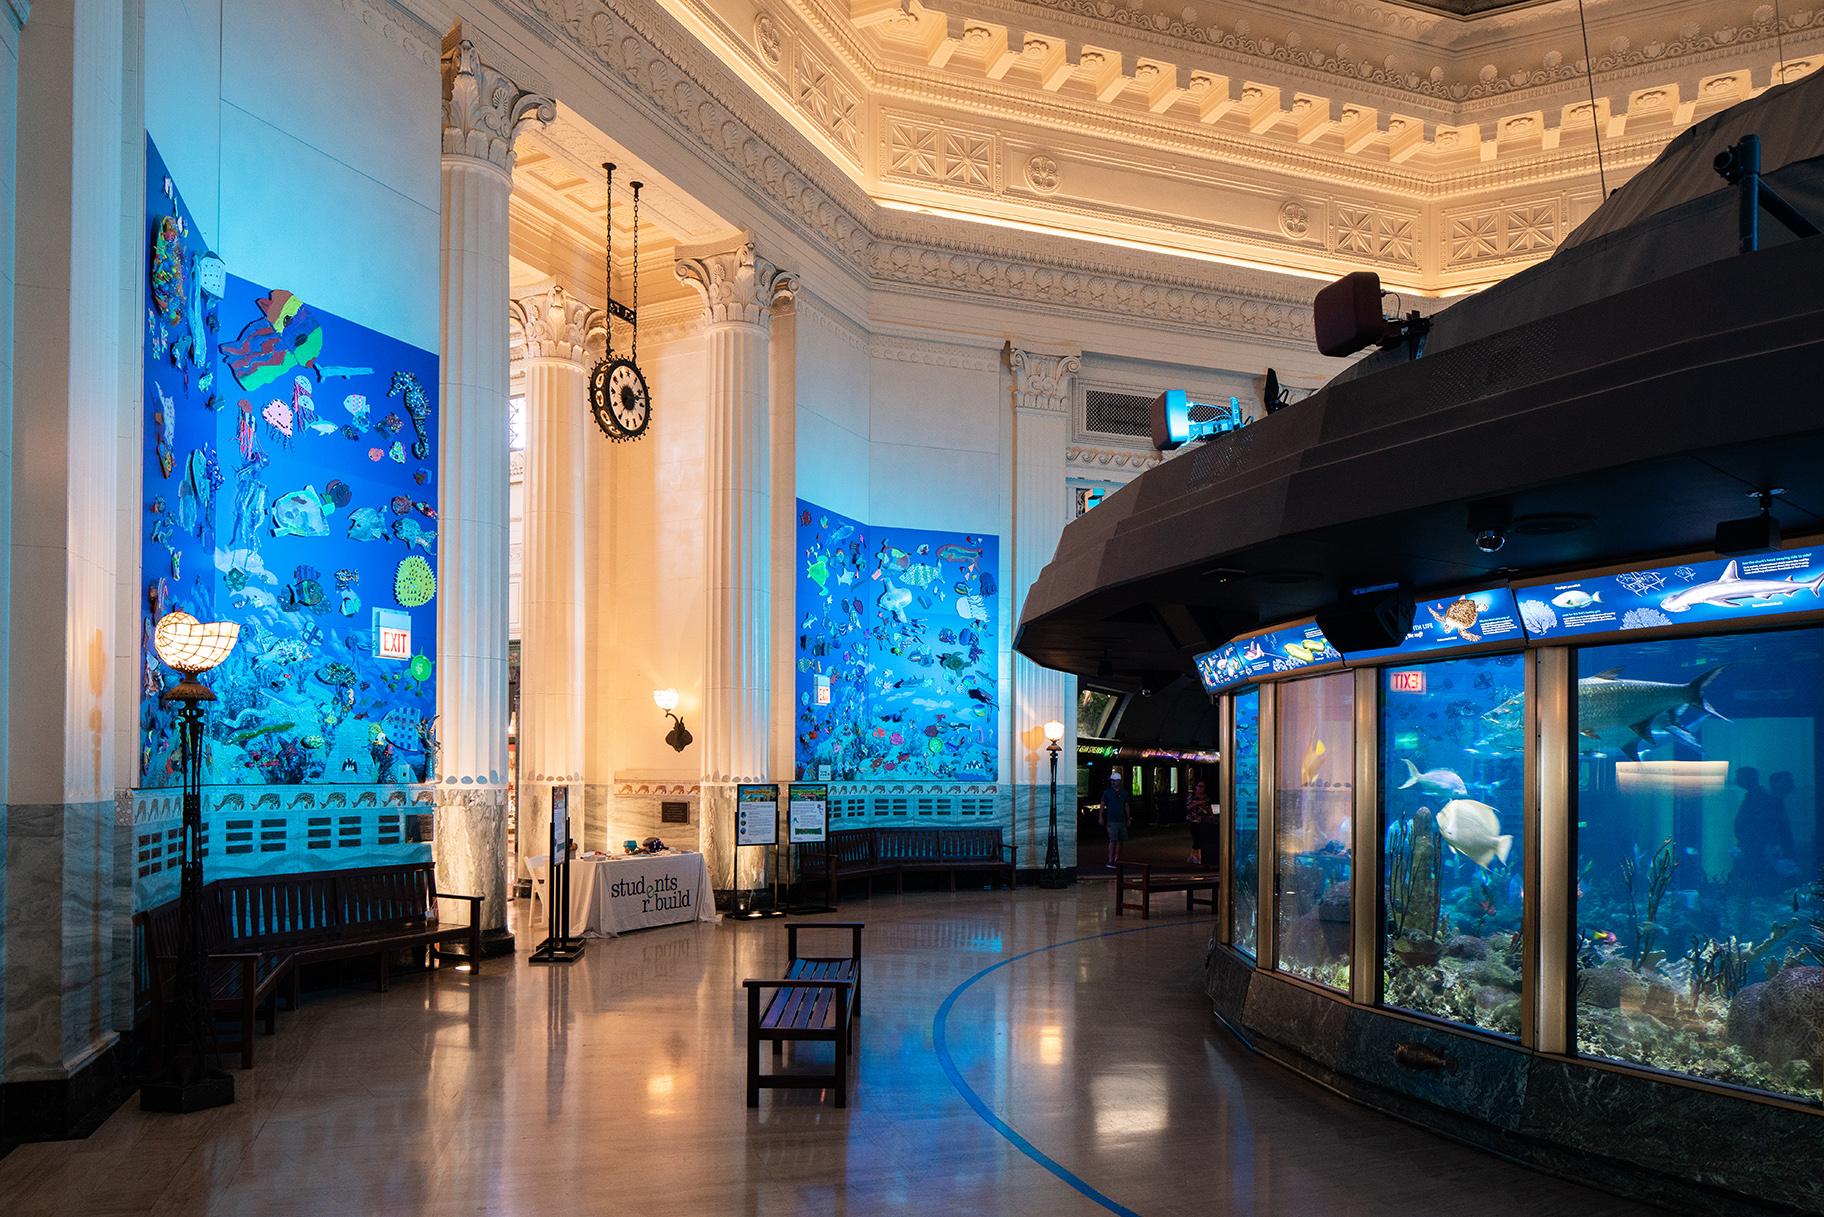 The student-made art is on display next to Shedd Aquarium’s Caribbean Reef exhibit. (Joshua Ford / Bezos Family Foundation)